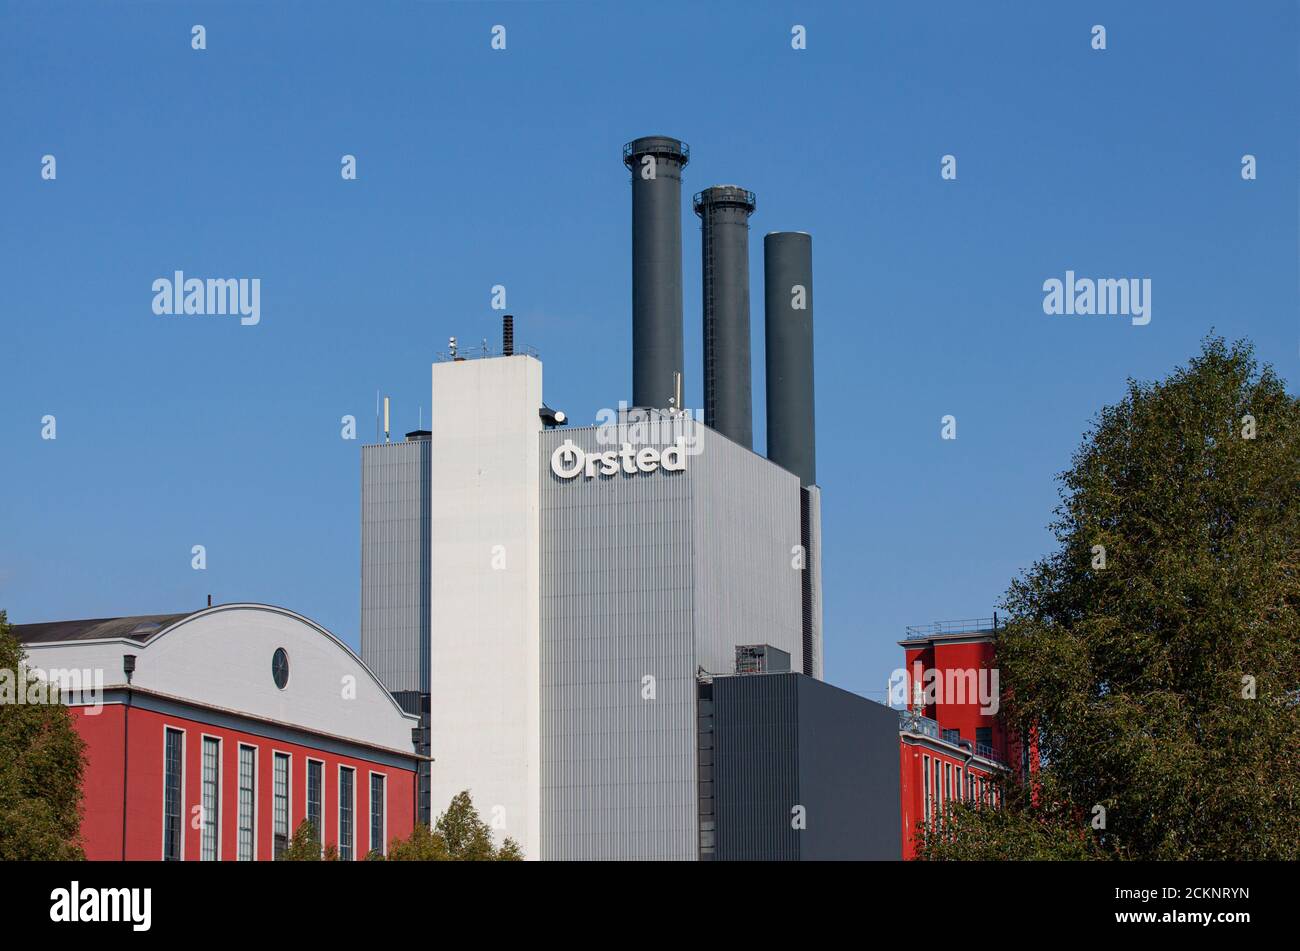 Ørsted Orsted logotype on building. Danish renewable company power plant factory producing electricity and energy from wind turbines. Copenhag Stock Photo - Alamy